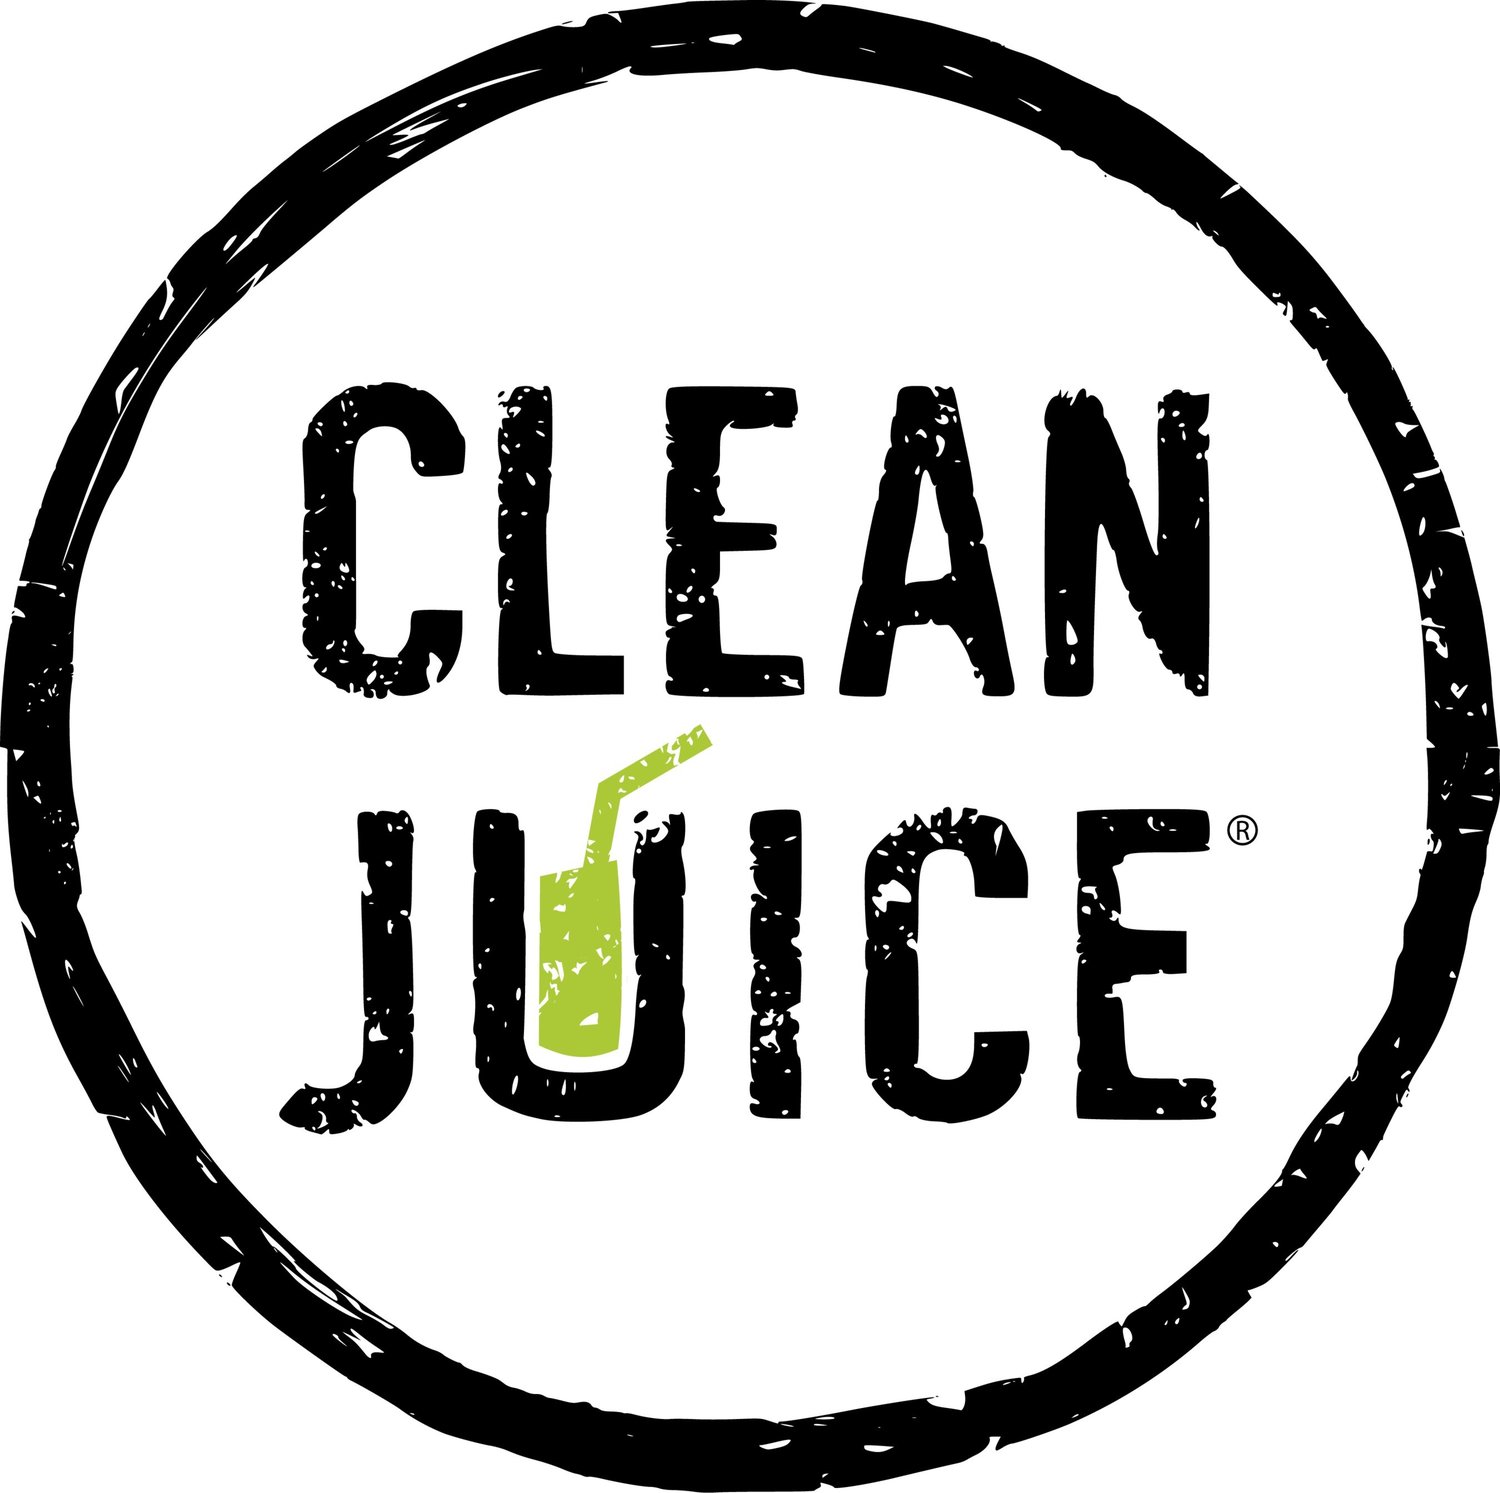 Clean Juice is the first and only USDA-certified organic juice bar franchise that offers organic açaí bowls, cold-pressed juices, smoothies, and other healthy food to on-the-go families in a warm and welcoming retail experience across the nation. www.cleanjuice.com.